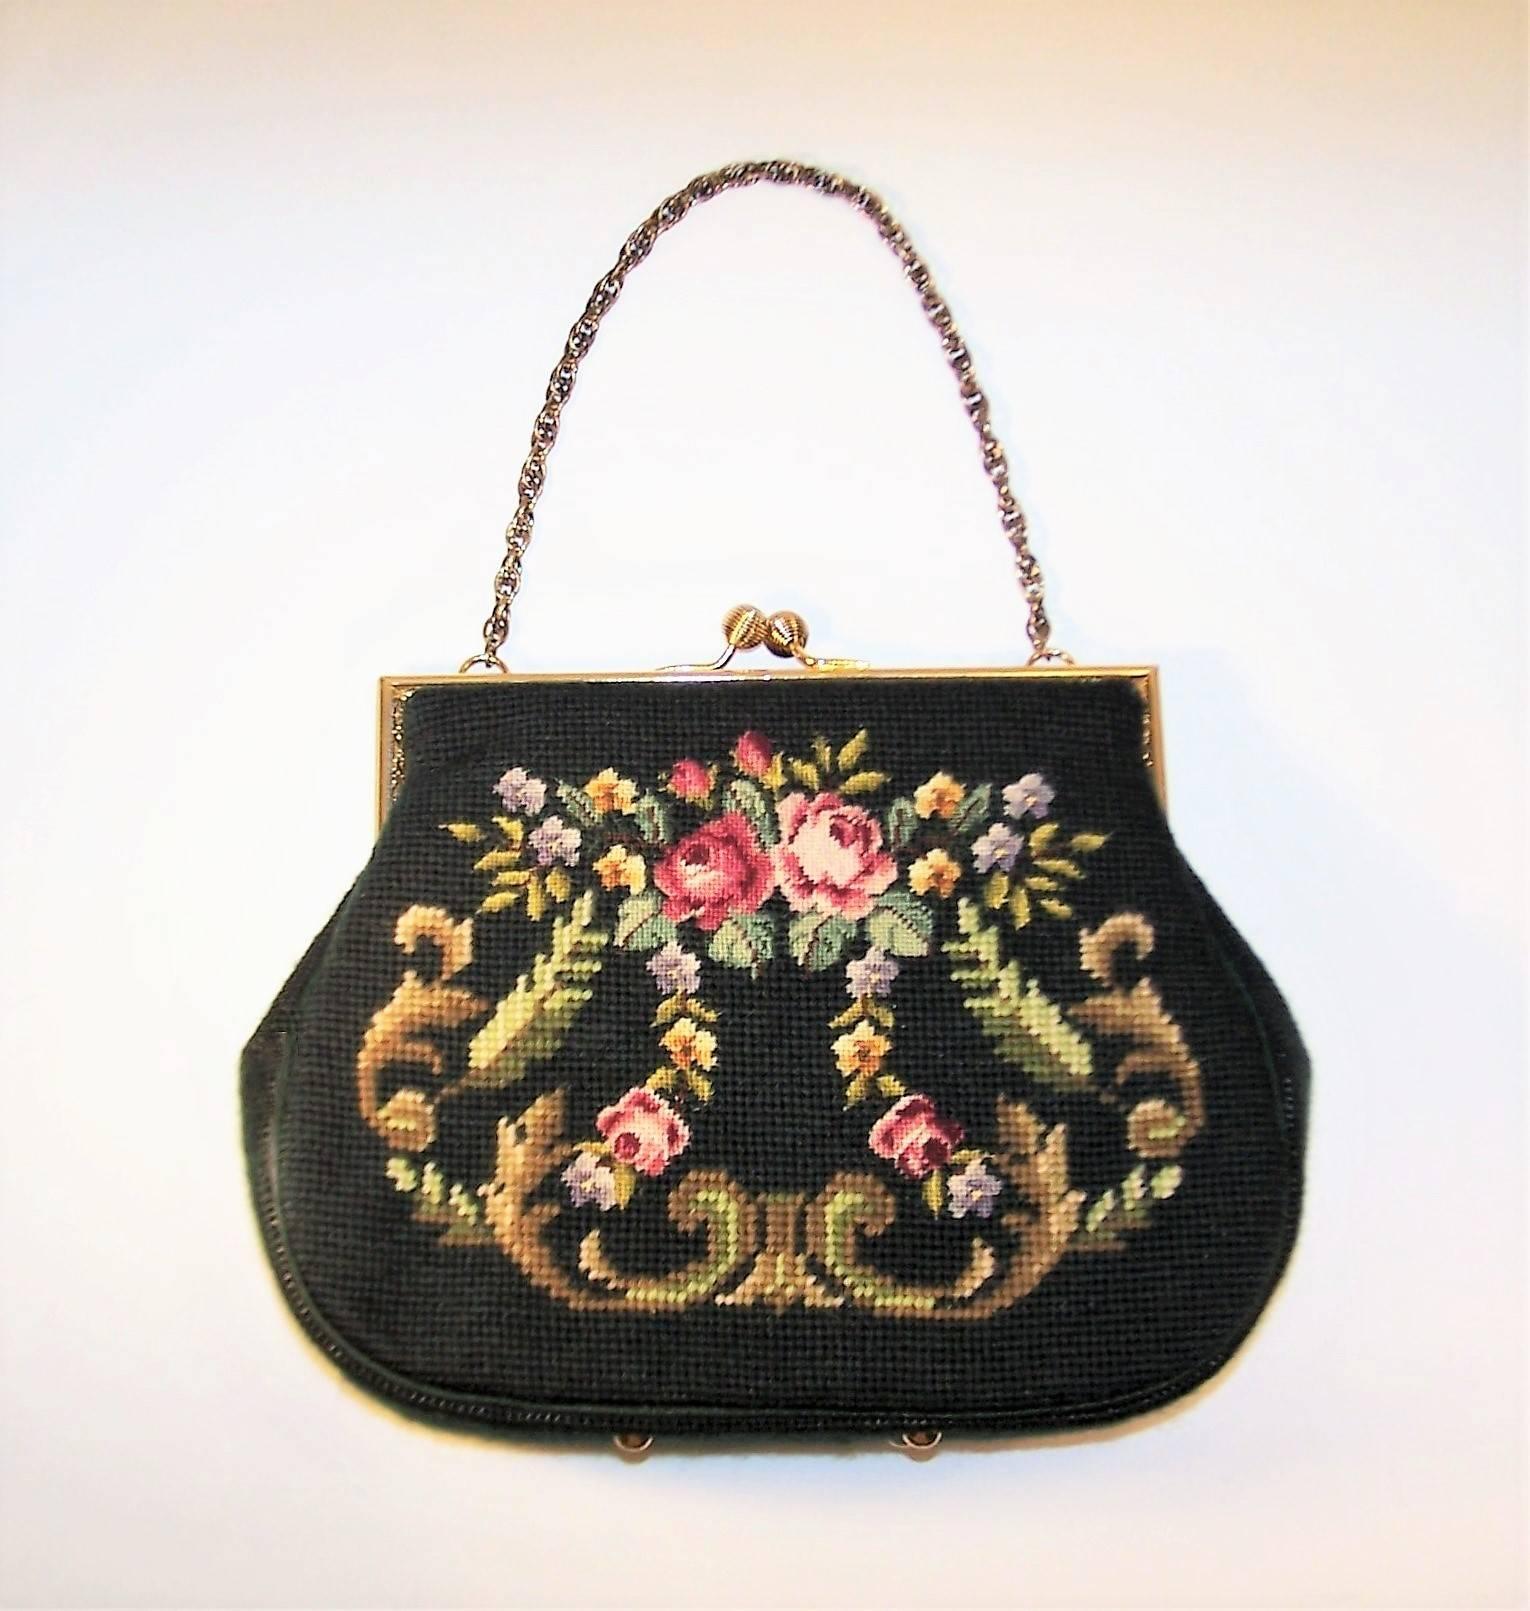 1950's Green Needlepoint Handbag With Floral Motif & Chain Handle 4